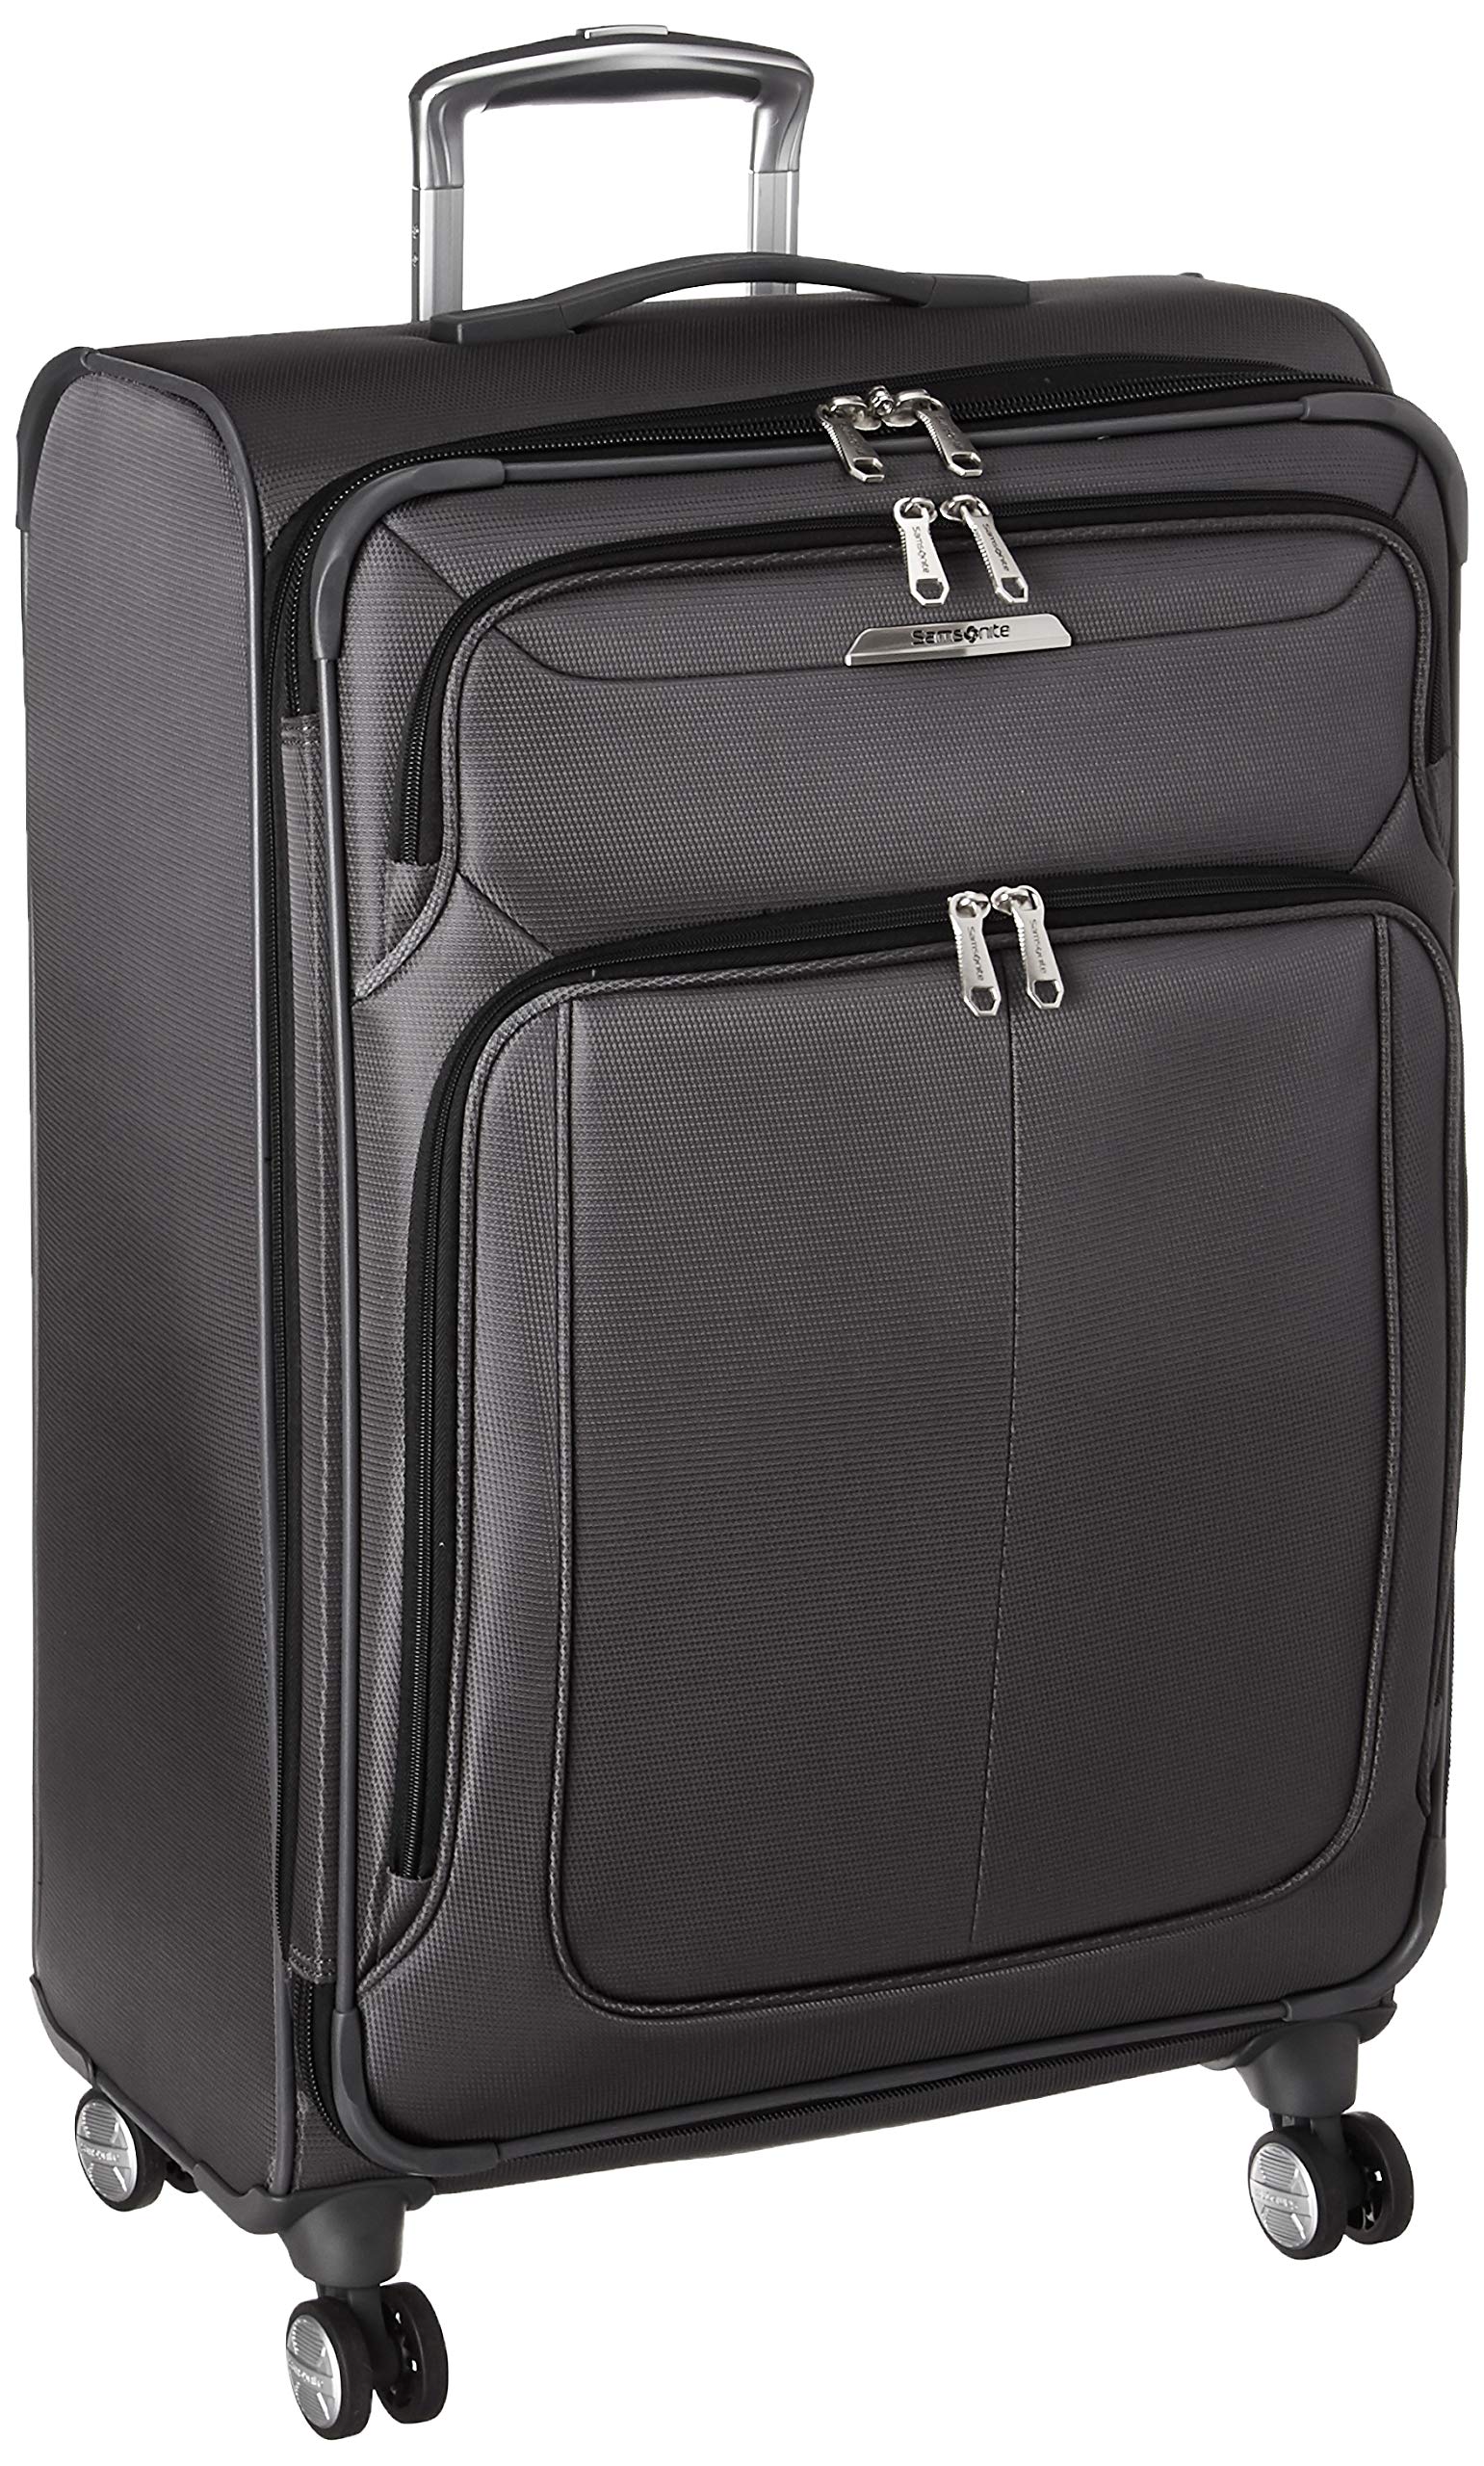 Samsonite Solyte DLX Softside Expandable Luggage with Spinner Wheels Midnight Black Checked-Medium 25-Inch 